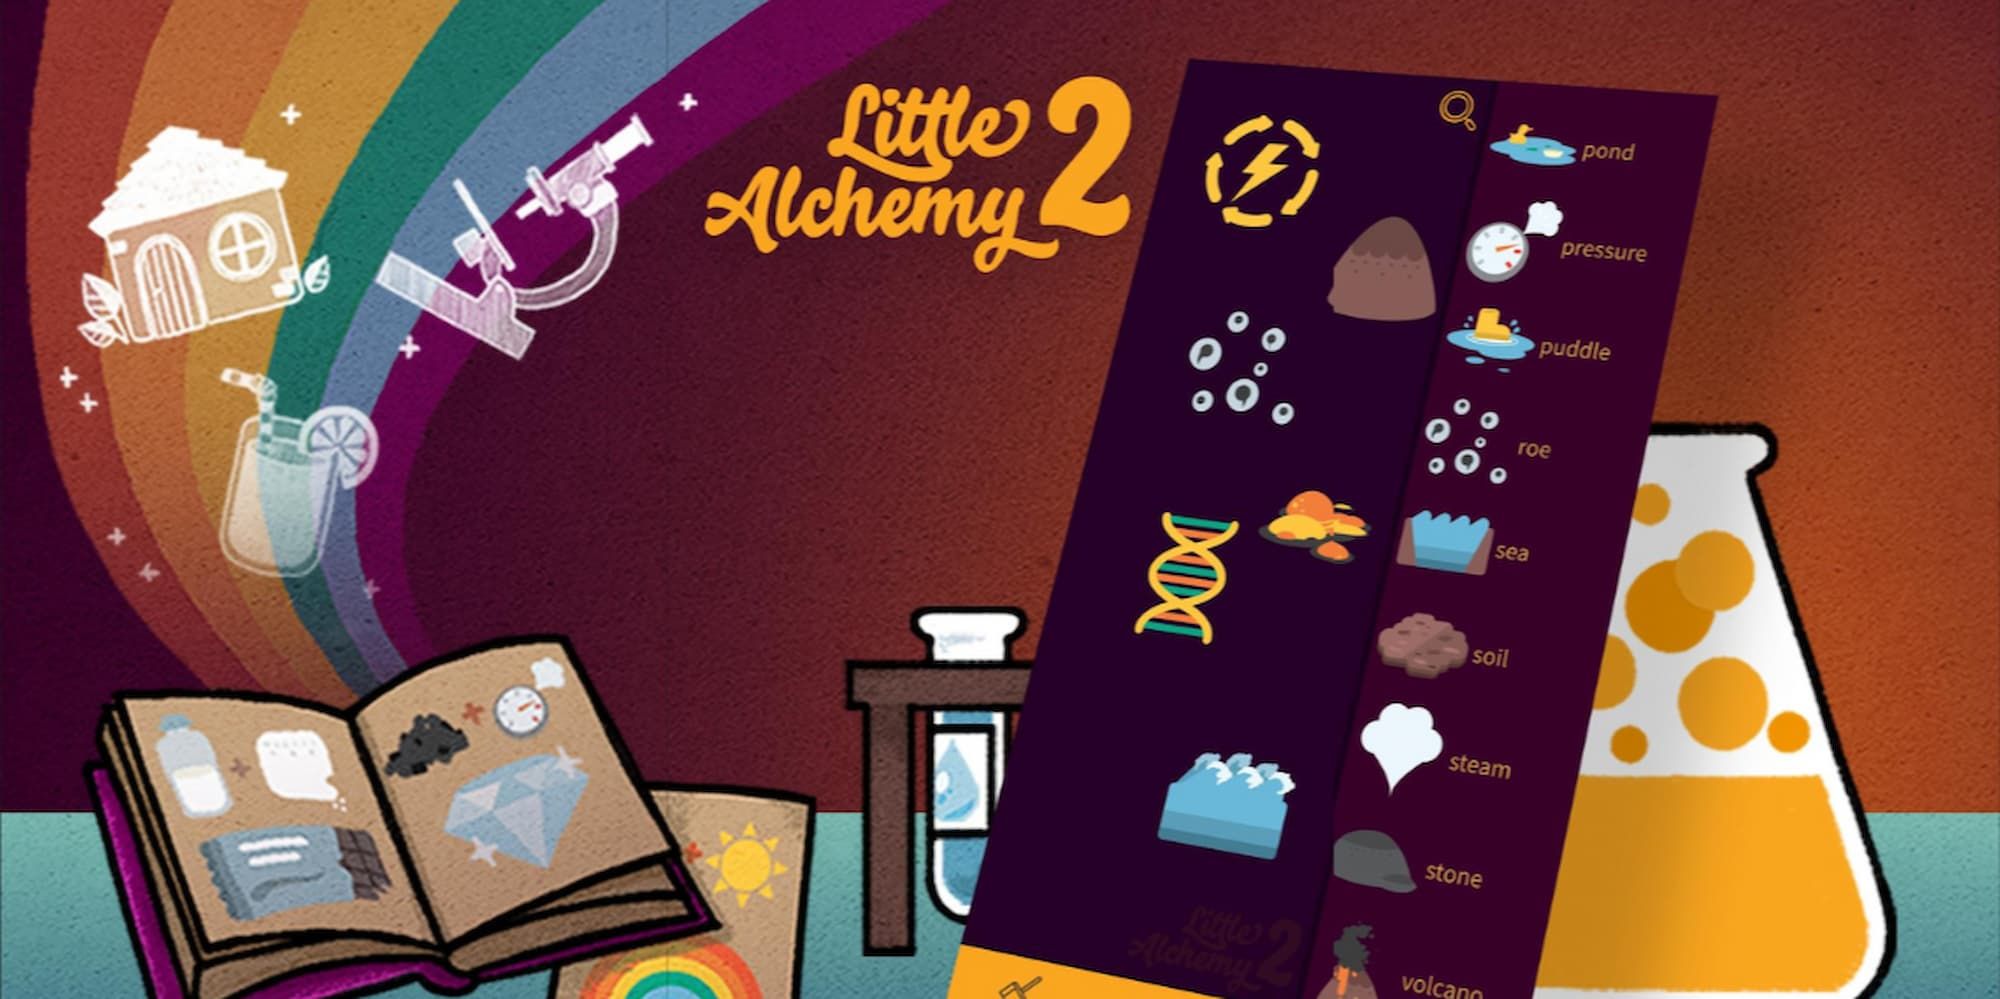 List of all the Elements You can create in Little Alchemy 2 - Creation Game